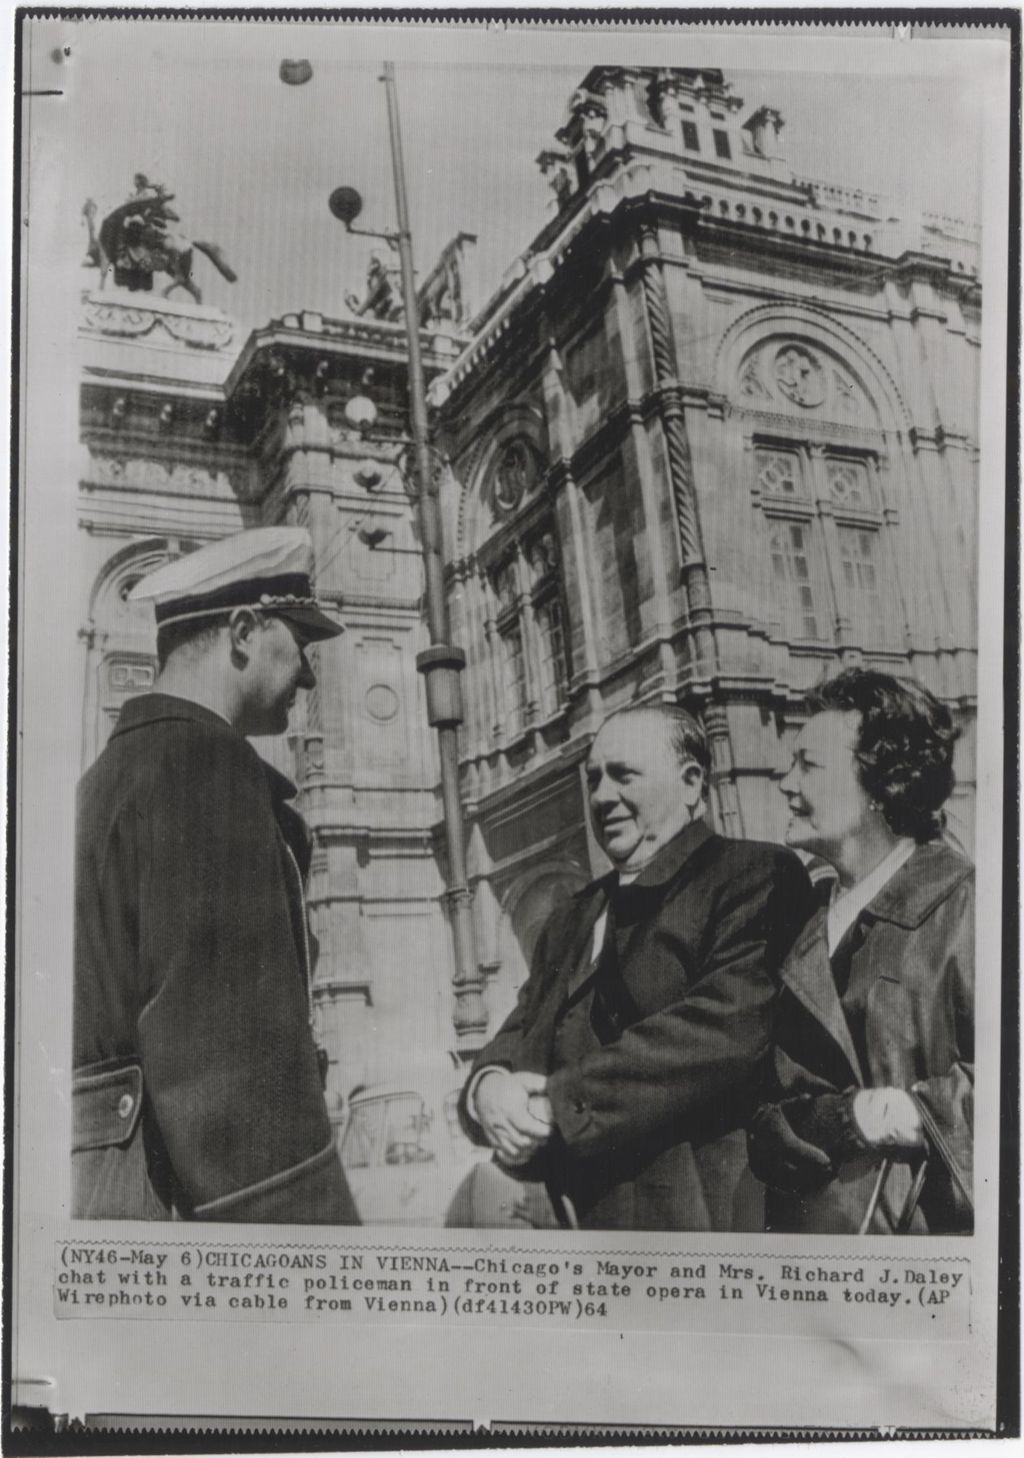 Richard J. Daley and Eleanor Daley in Vienna